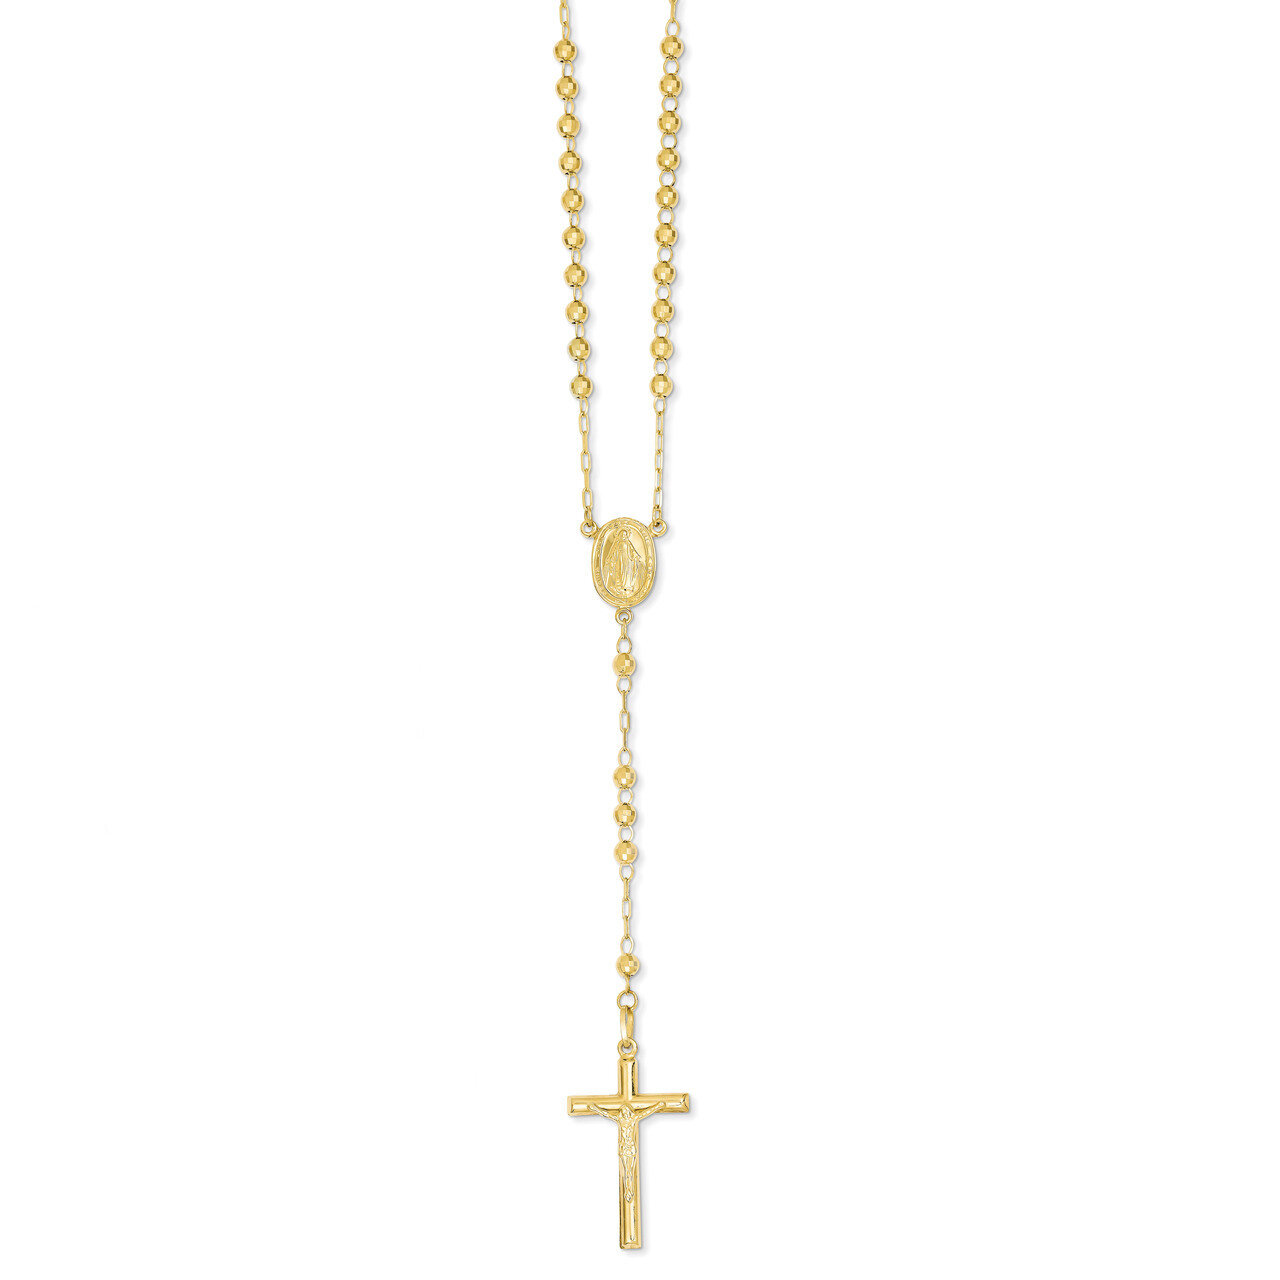 4mm Beaded Rosary Necklace 24 Inch 14k Gold Diamond-cut SF2066-24